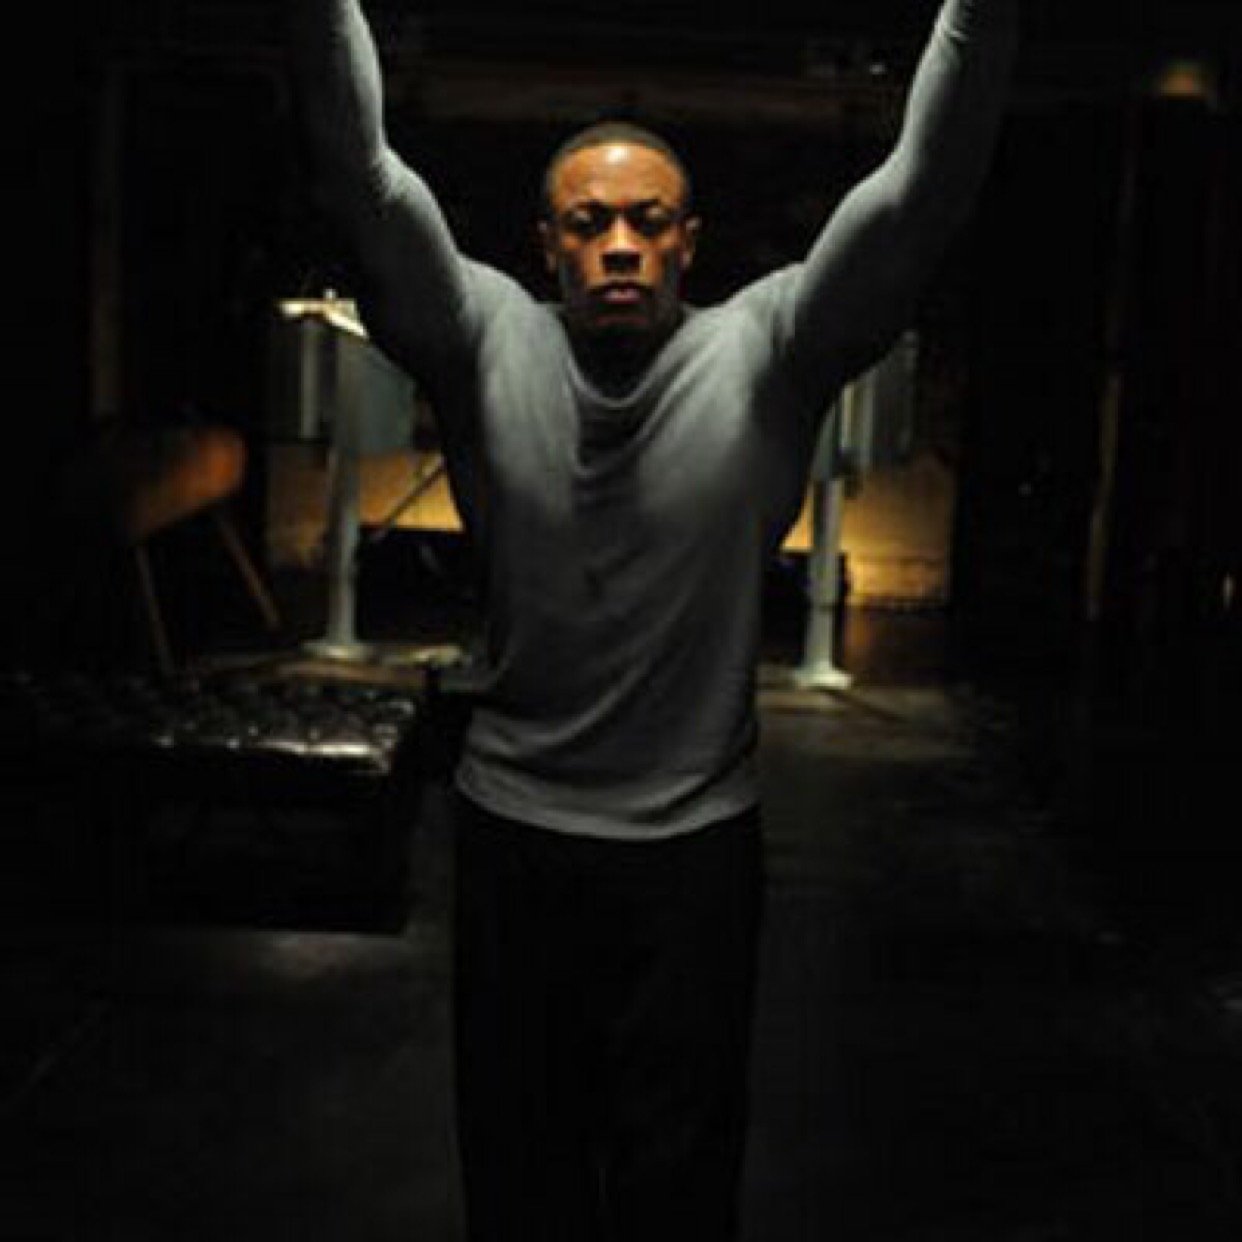 This is Dr. Dre's official Twitter page. Dre does not tweet